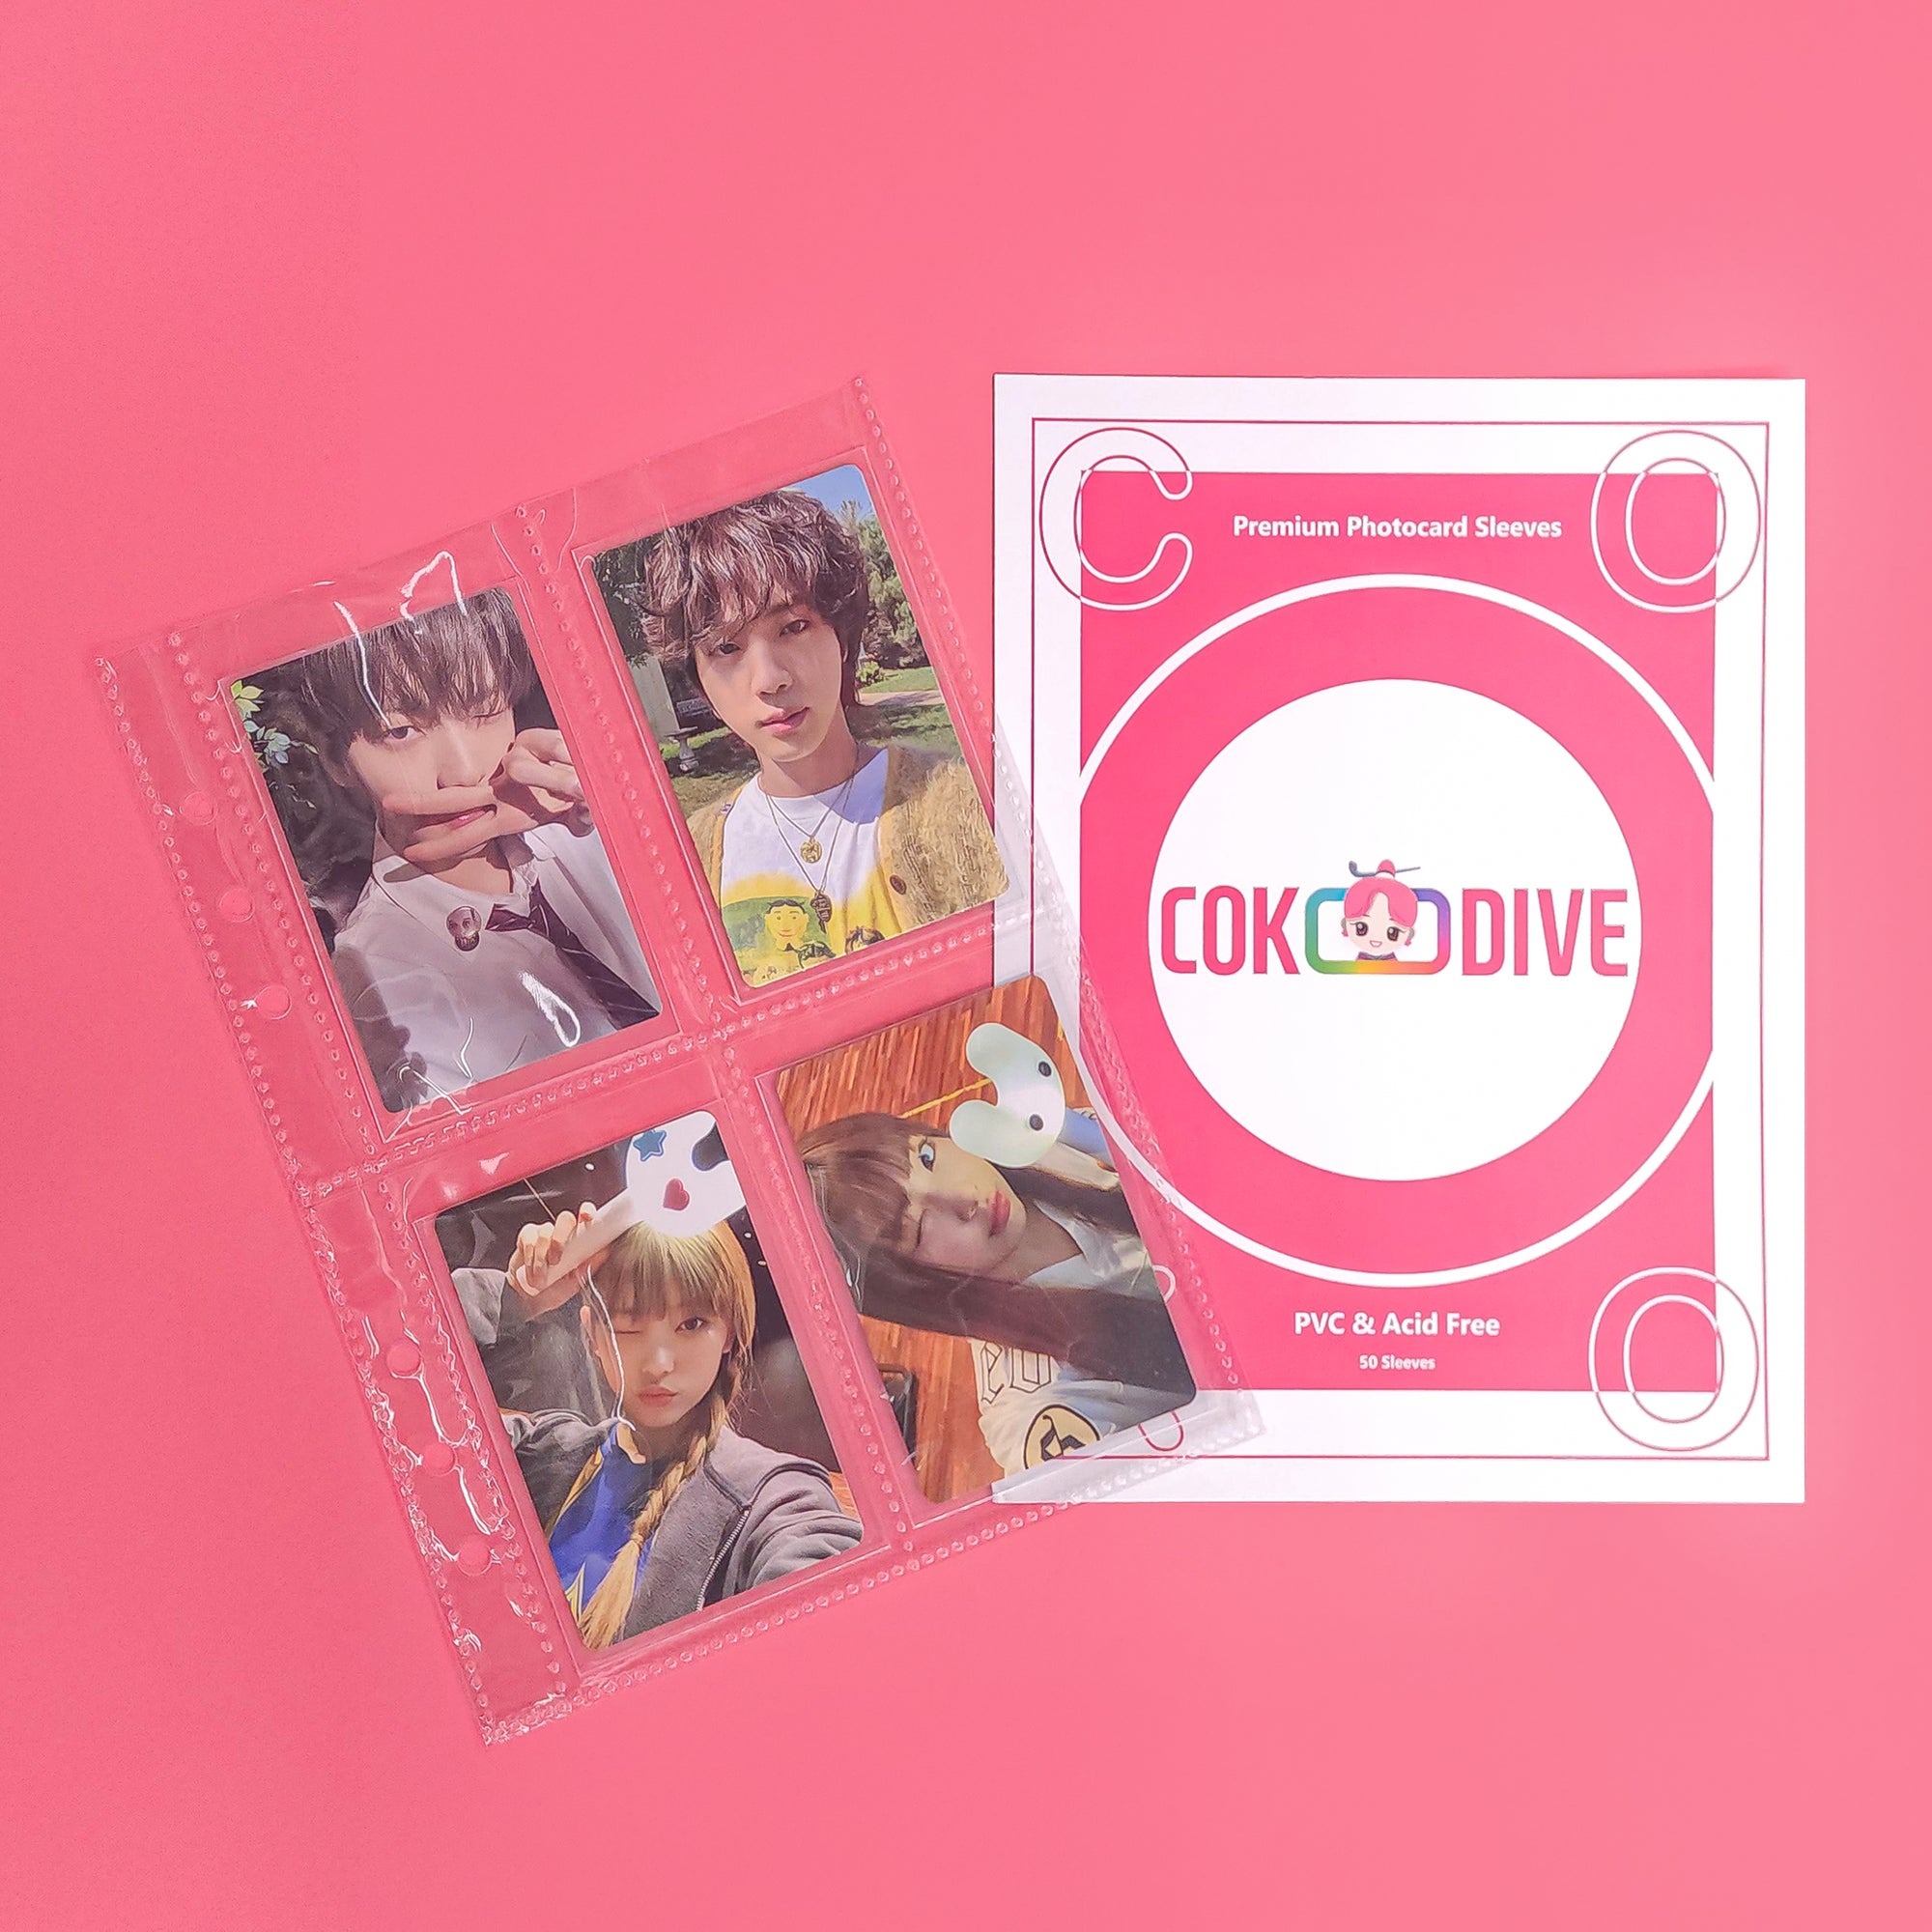 A5 4 POCKET PHOTOCARD SLEEVES FOR K-POP FANS - COKODIVE